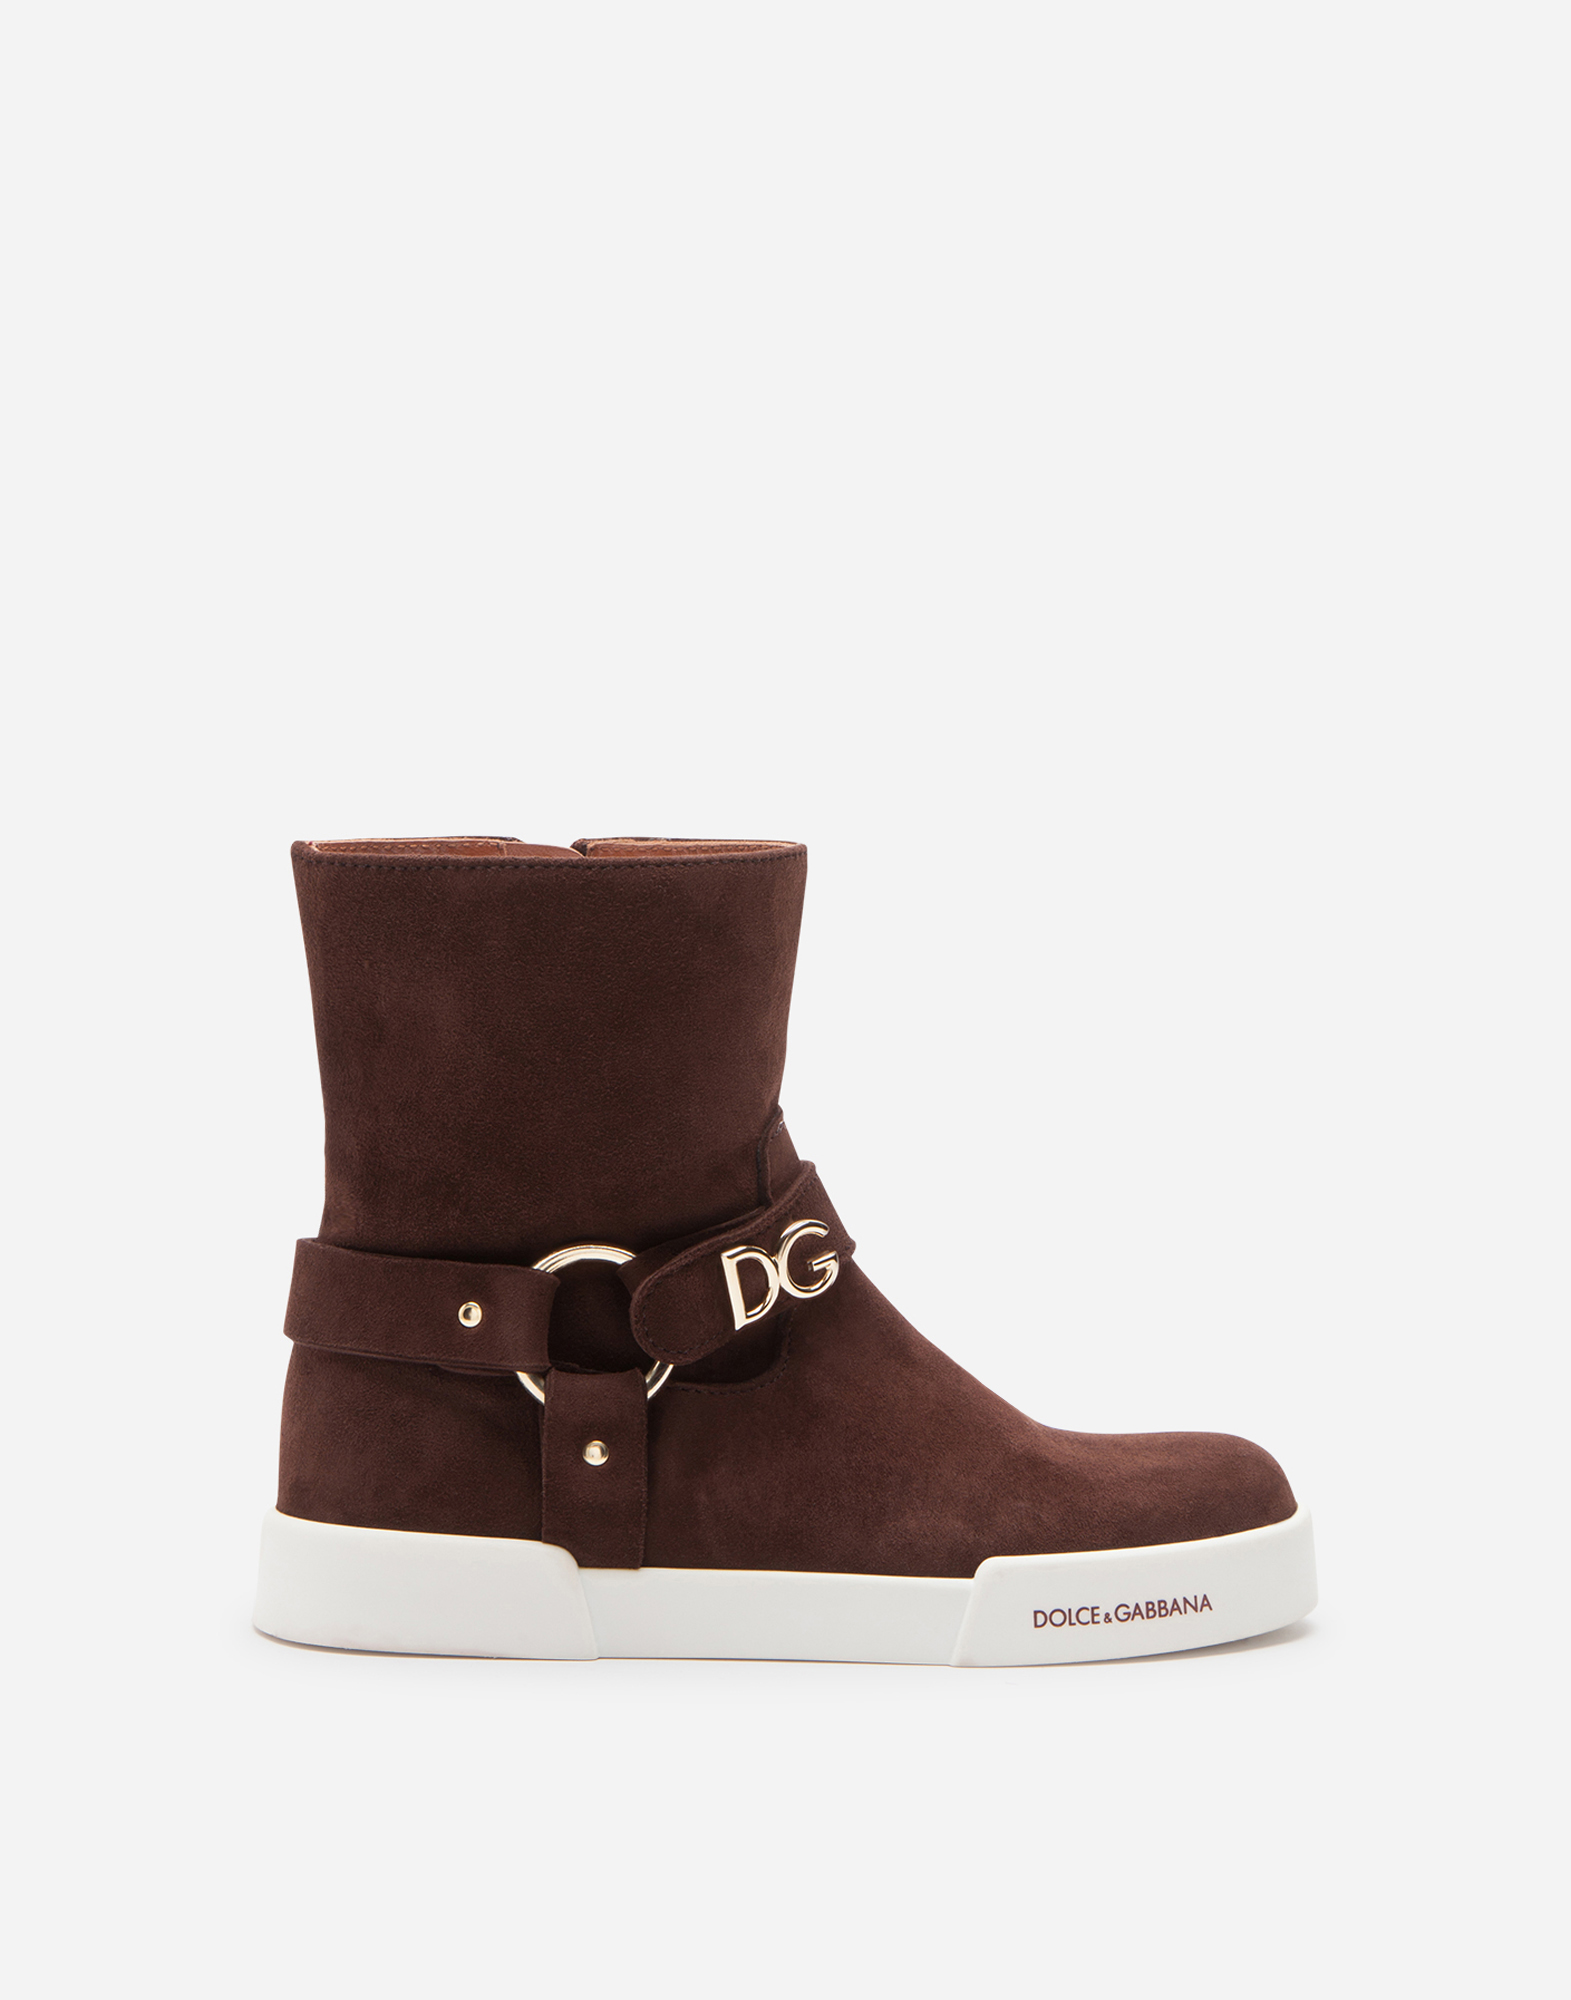 DOLCE & GABBANA Suede ankle boots with DG lettering